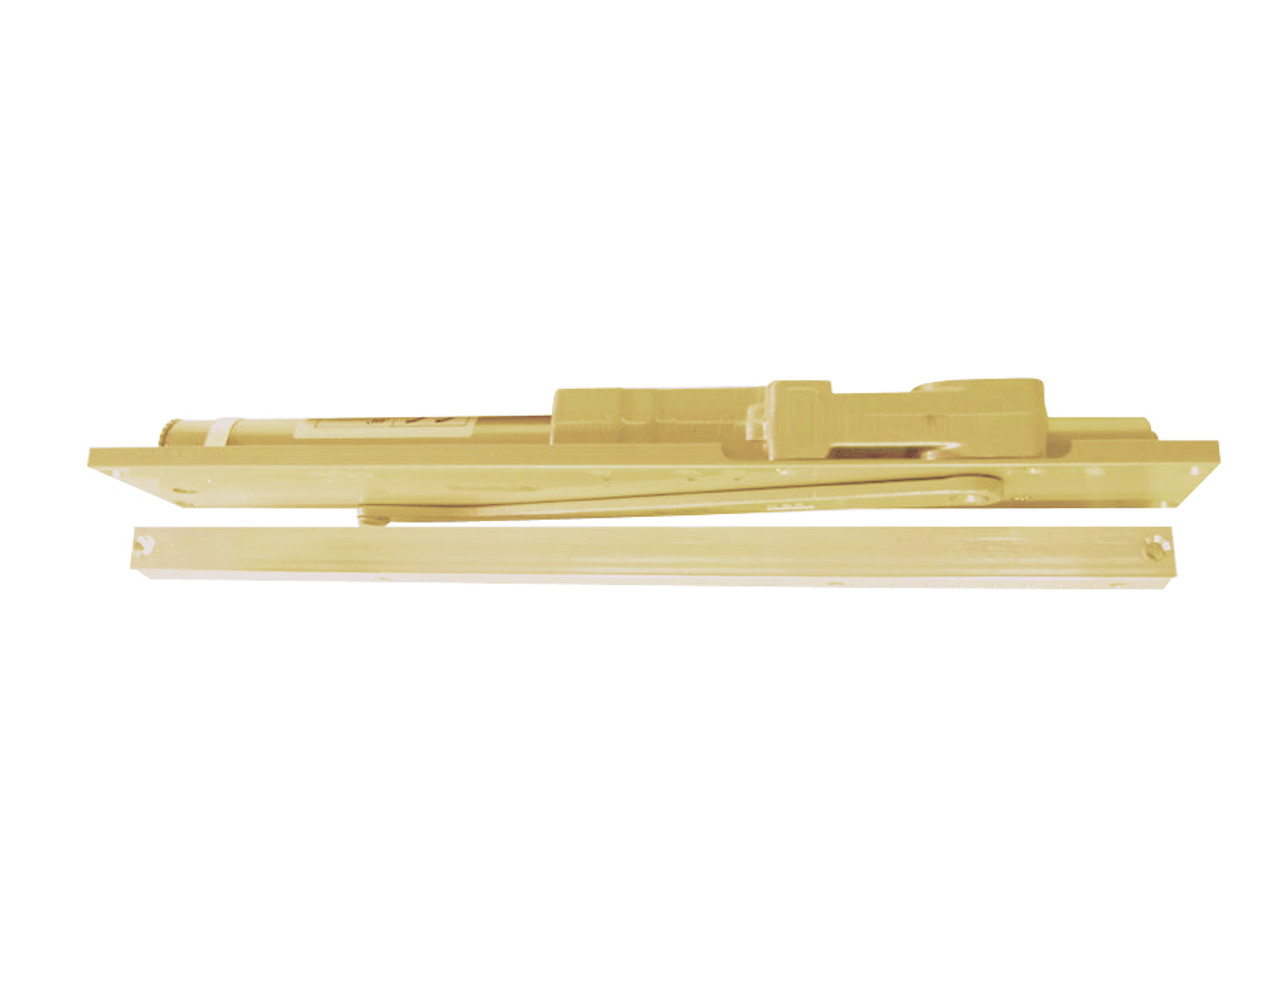 2032-H-BUMPER-LH-US4 LCN Door Closer Hold Open Track with BUMPER in Satin Brass Finish